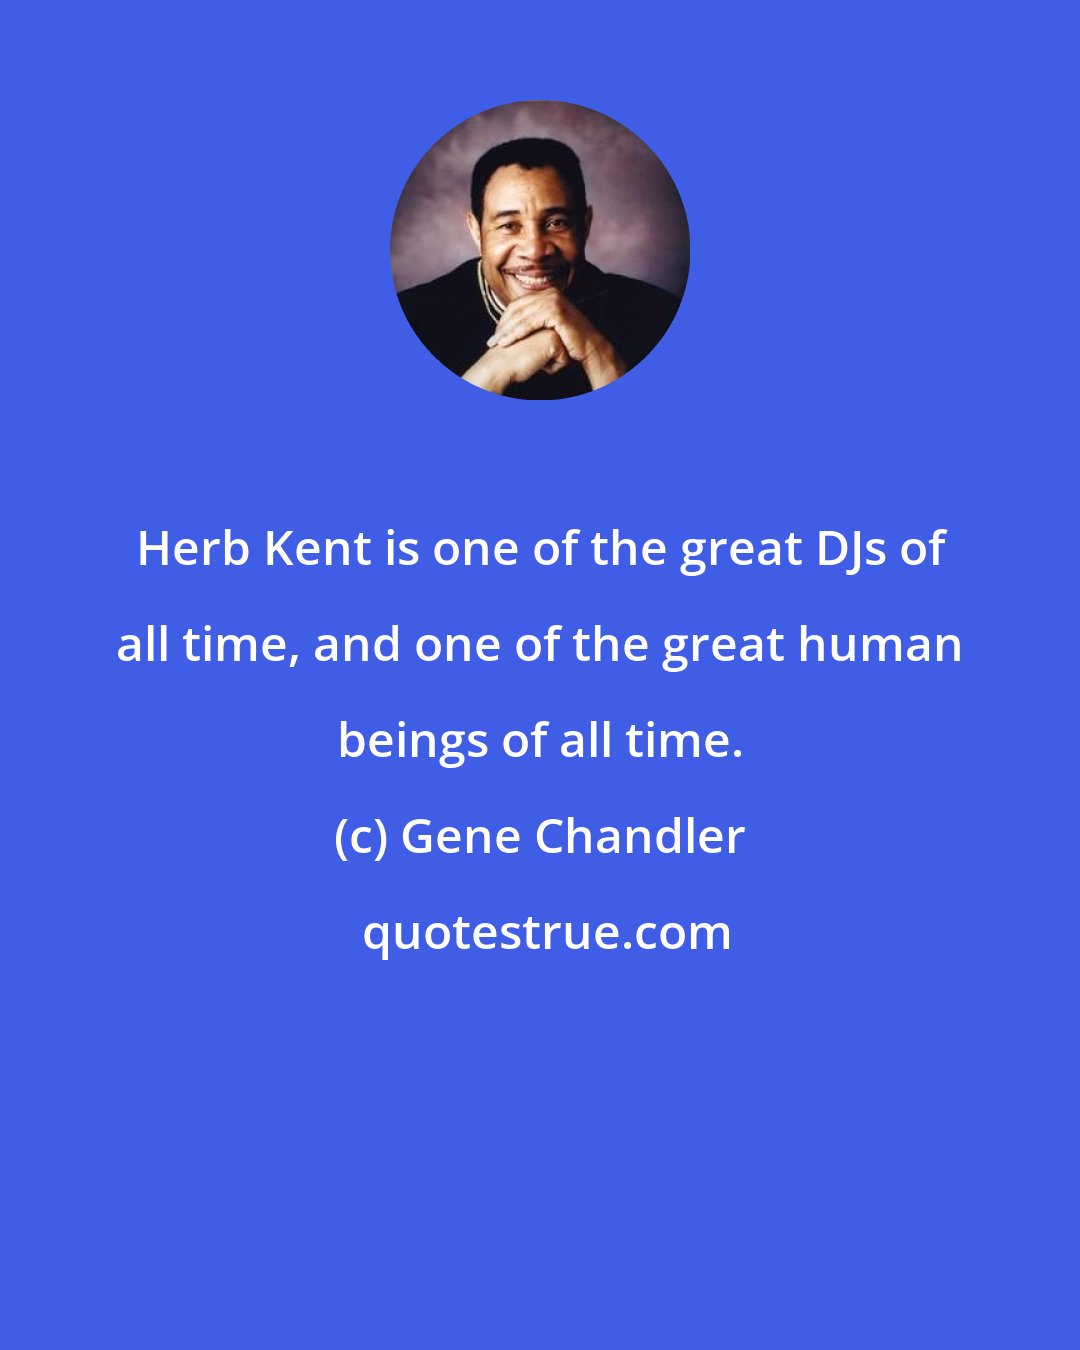 Gene Chandler: Herb Kent is one of the great DJs of all time, and one of the great human beings of all time.